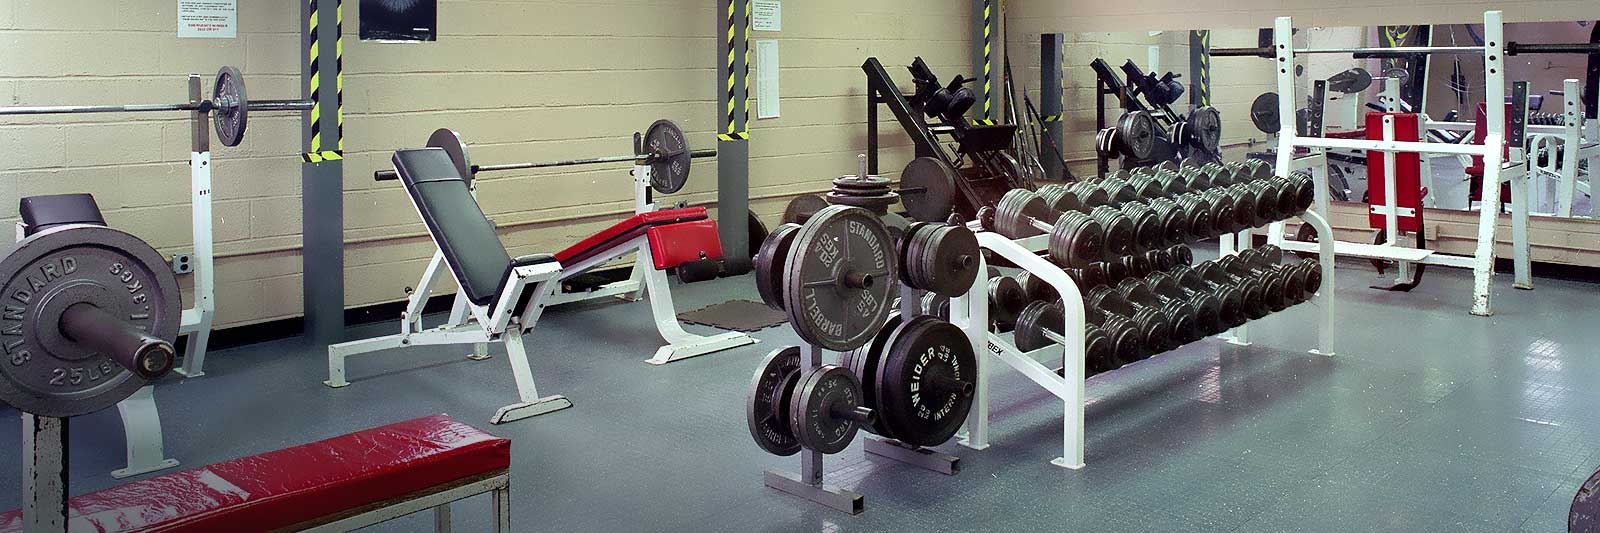 photo of weight rooml